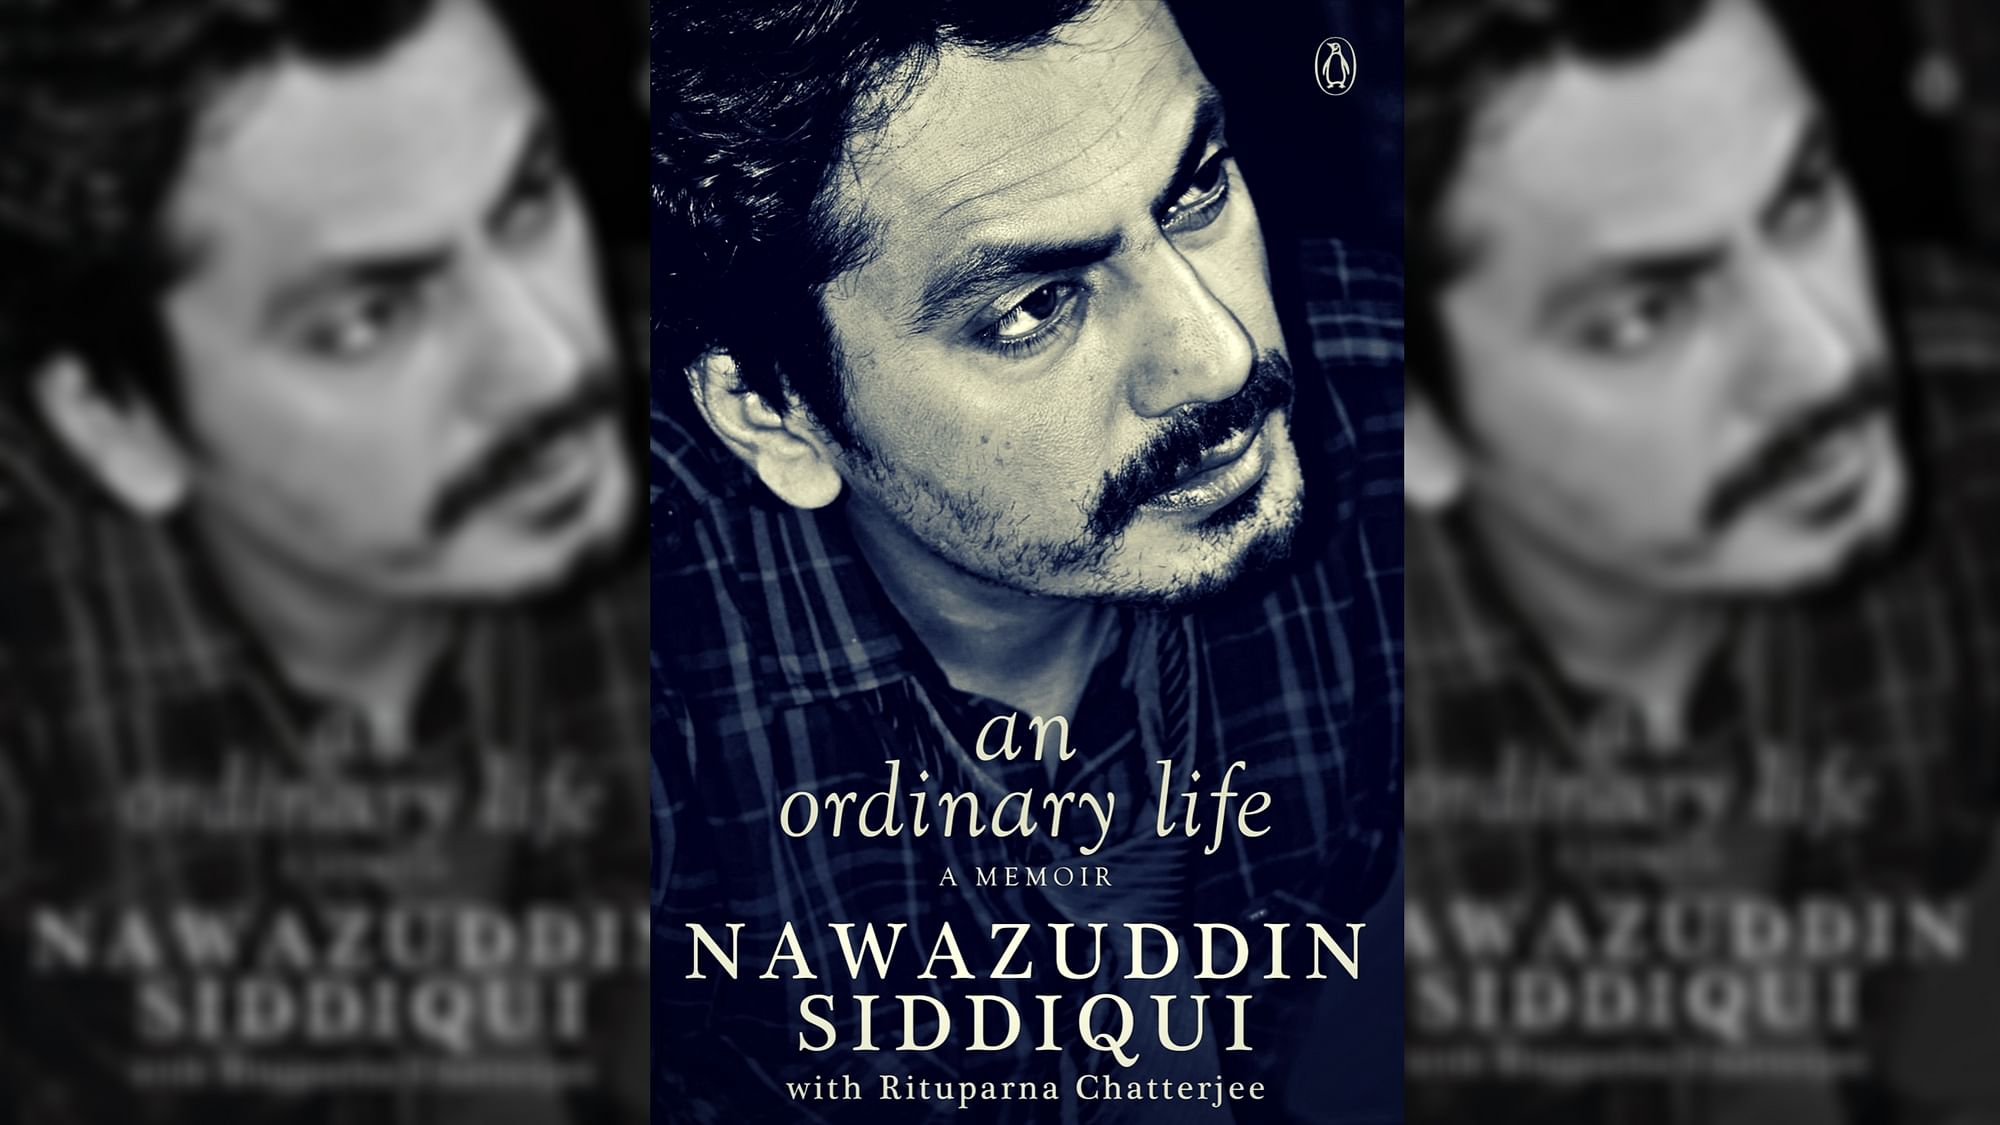 For the uninitiated, the Bollywood actor’s book faced legal ramifications after he wrote at length about his past relationships.